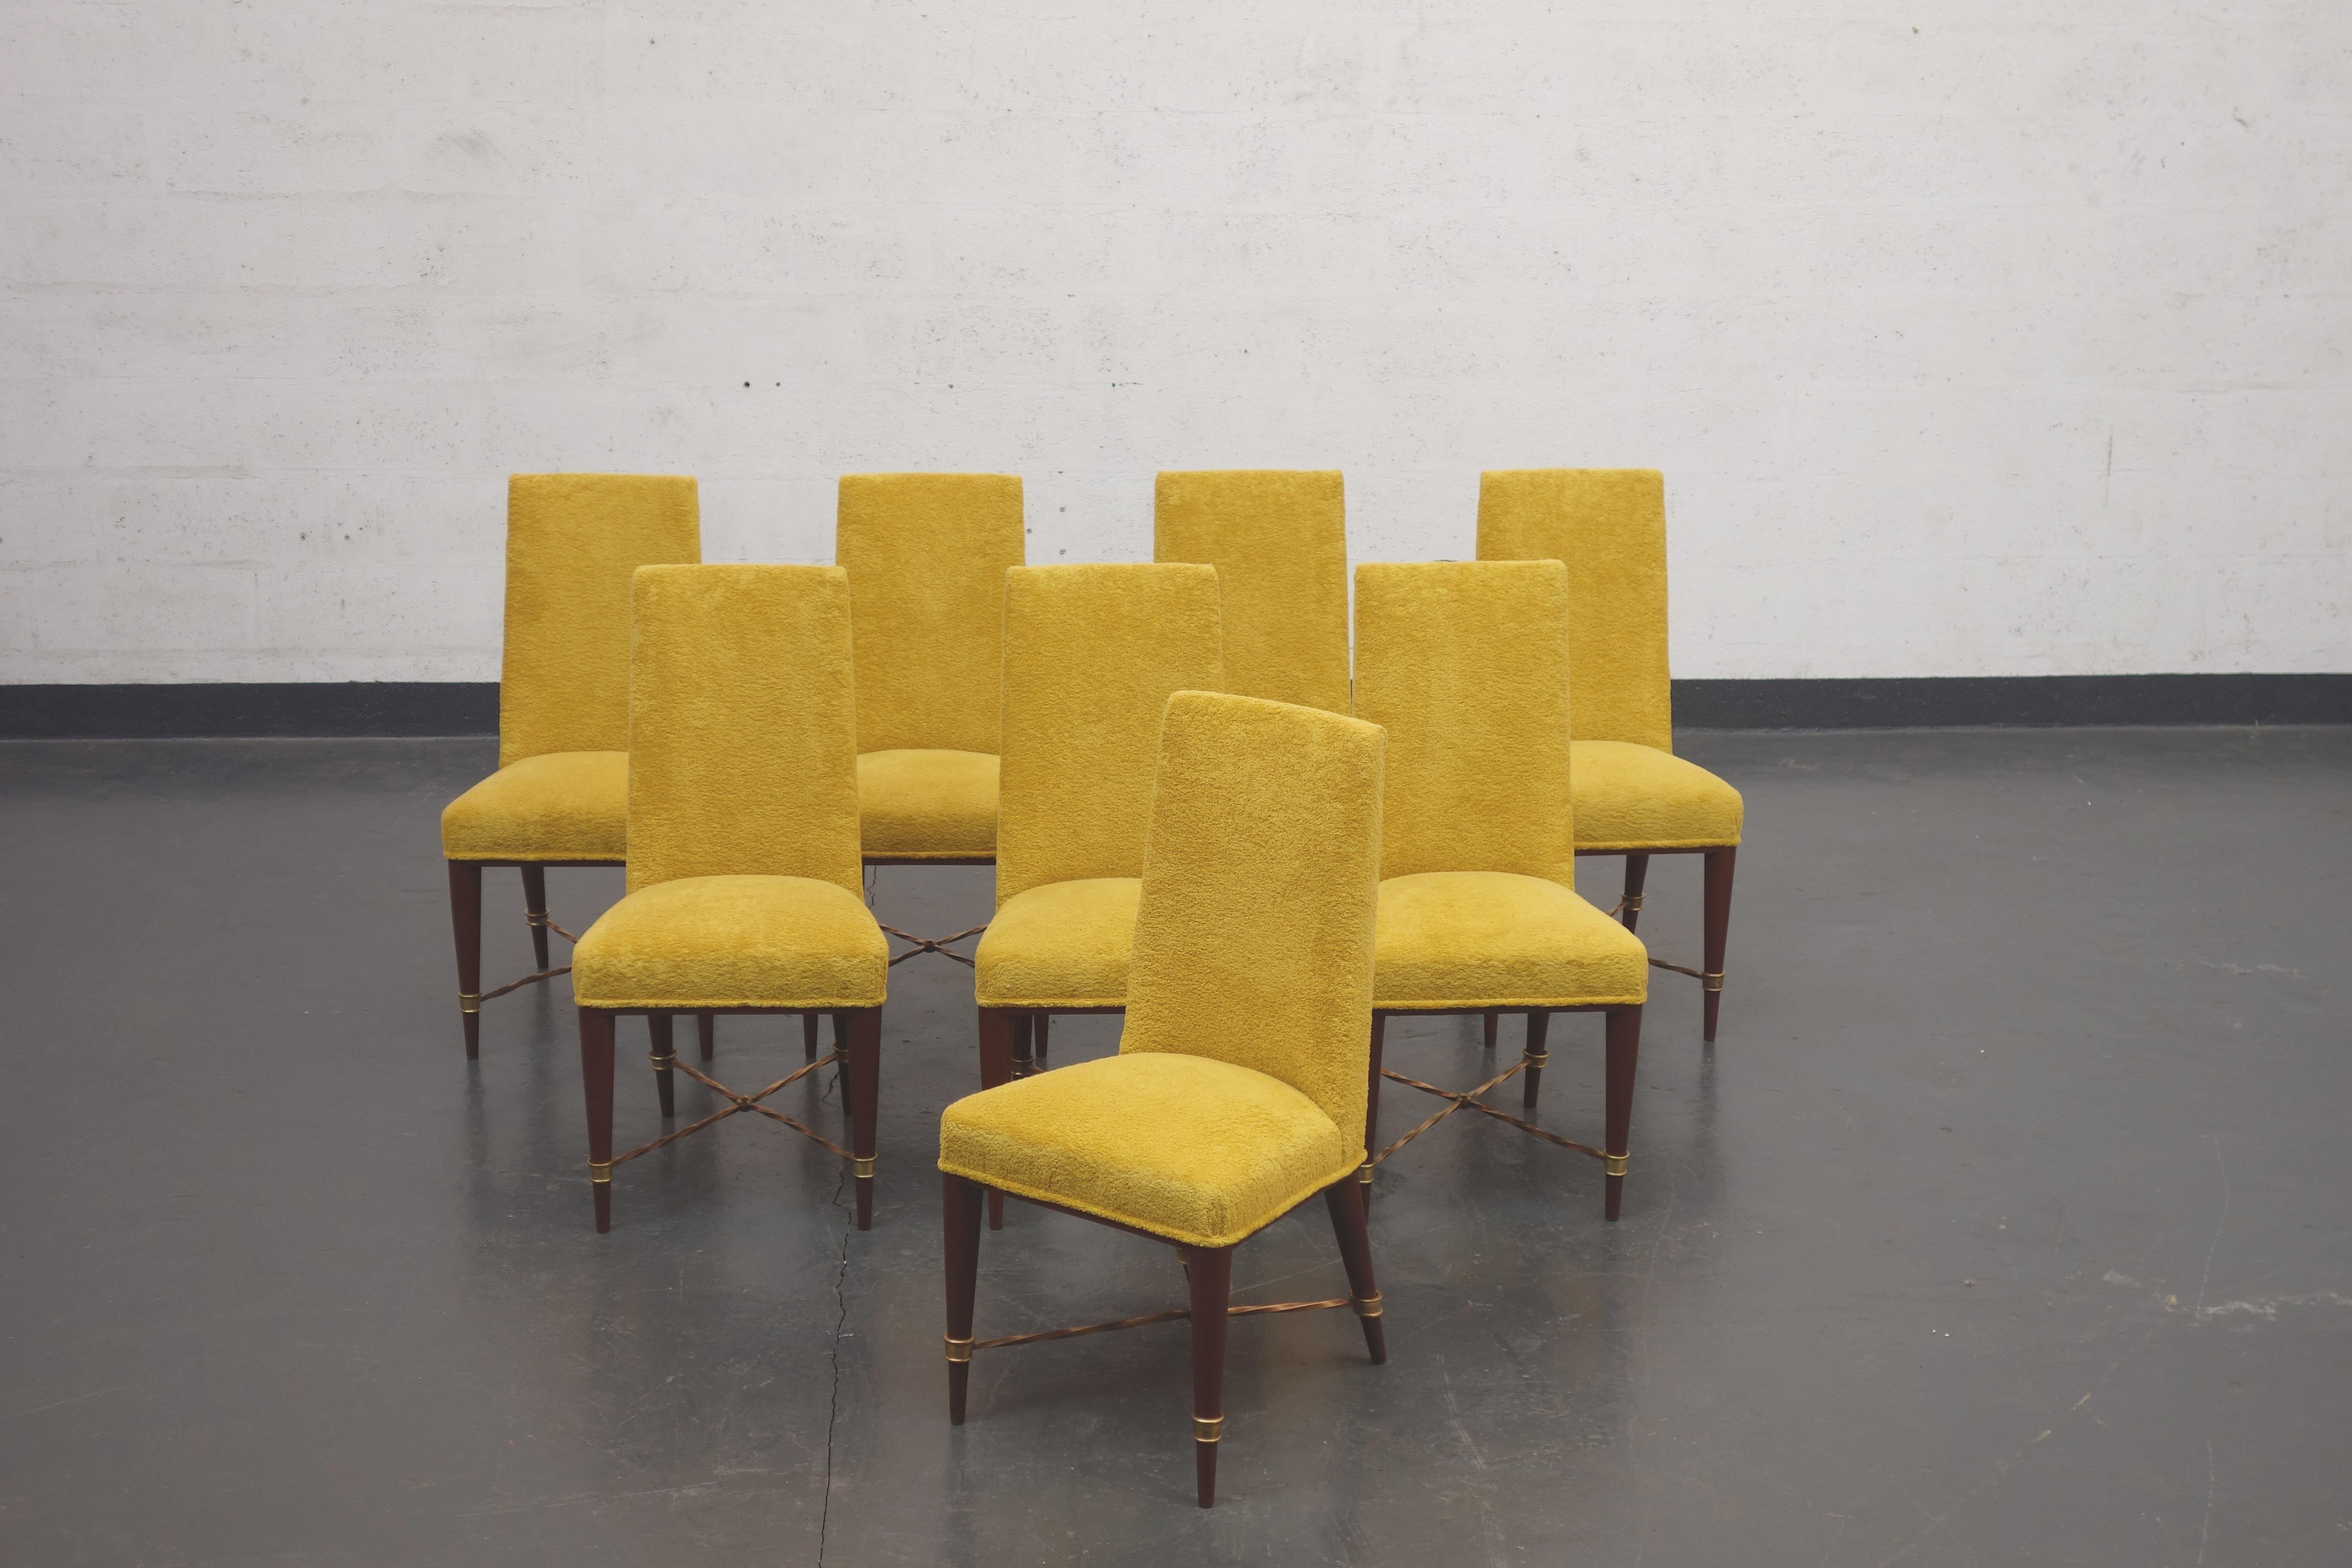 Set of 8 chairs by Jean Royère, 1957 
Wood structure. On each leg, a gilded bronze ring with twisted W-shaped rods. 
The back is flat, lightly curved. These chairs have been upholstered with a yellow terry towel fabric. 

Provenance: Special